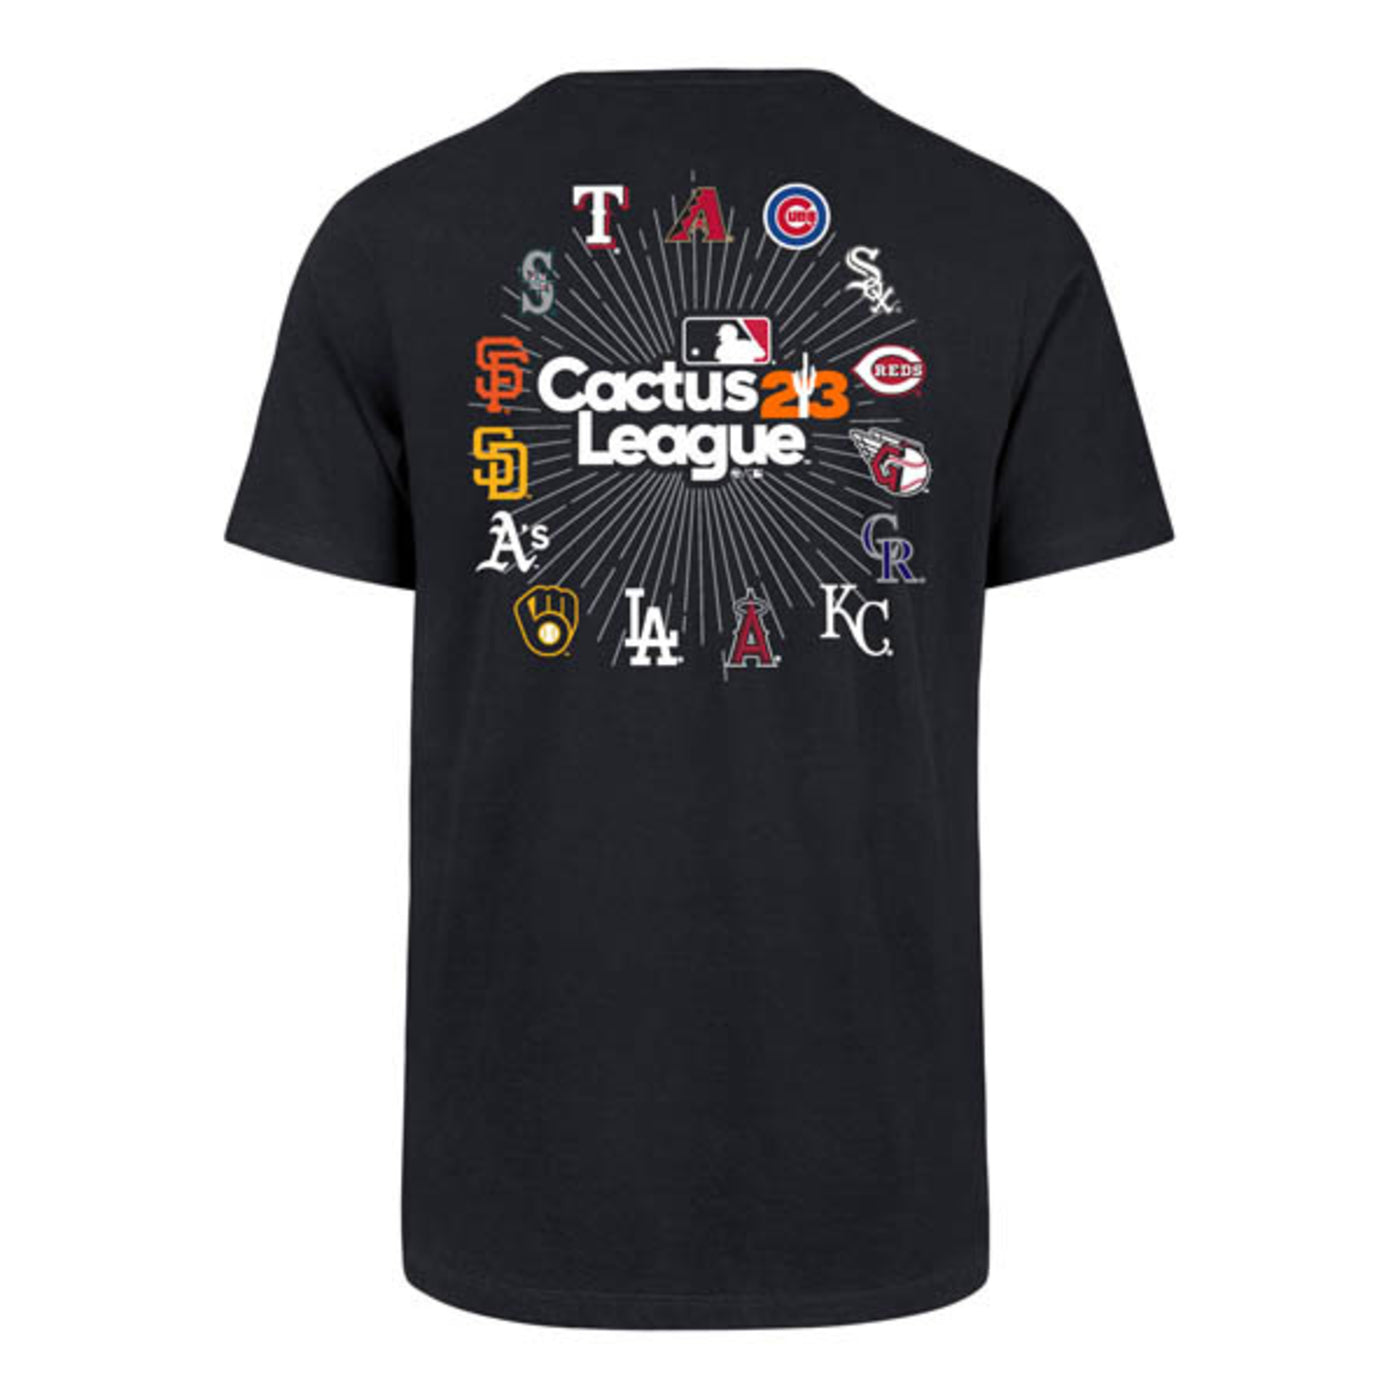 Navy blue short sleeve shirt with MLB logo in the center. Below the logo is 